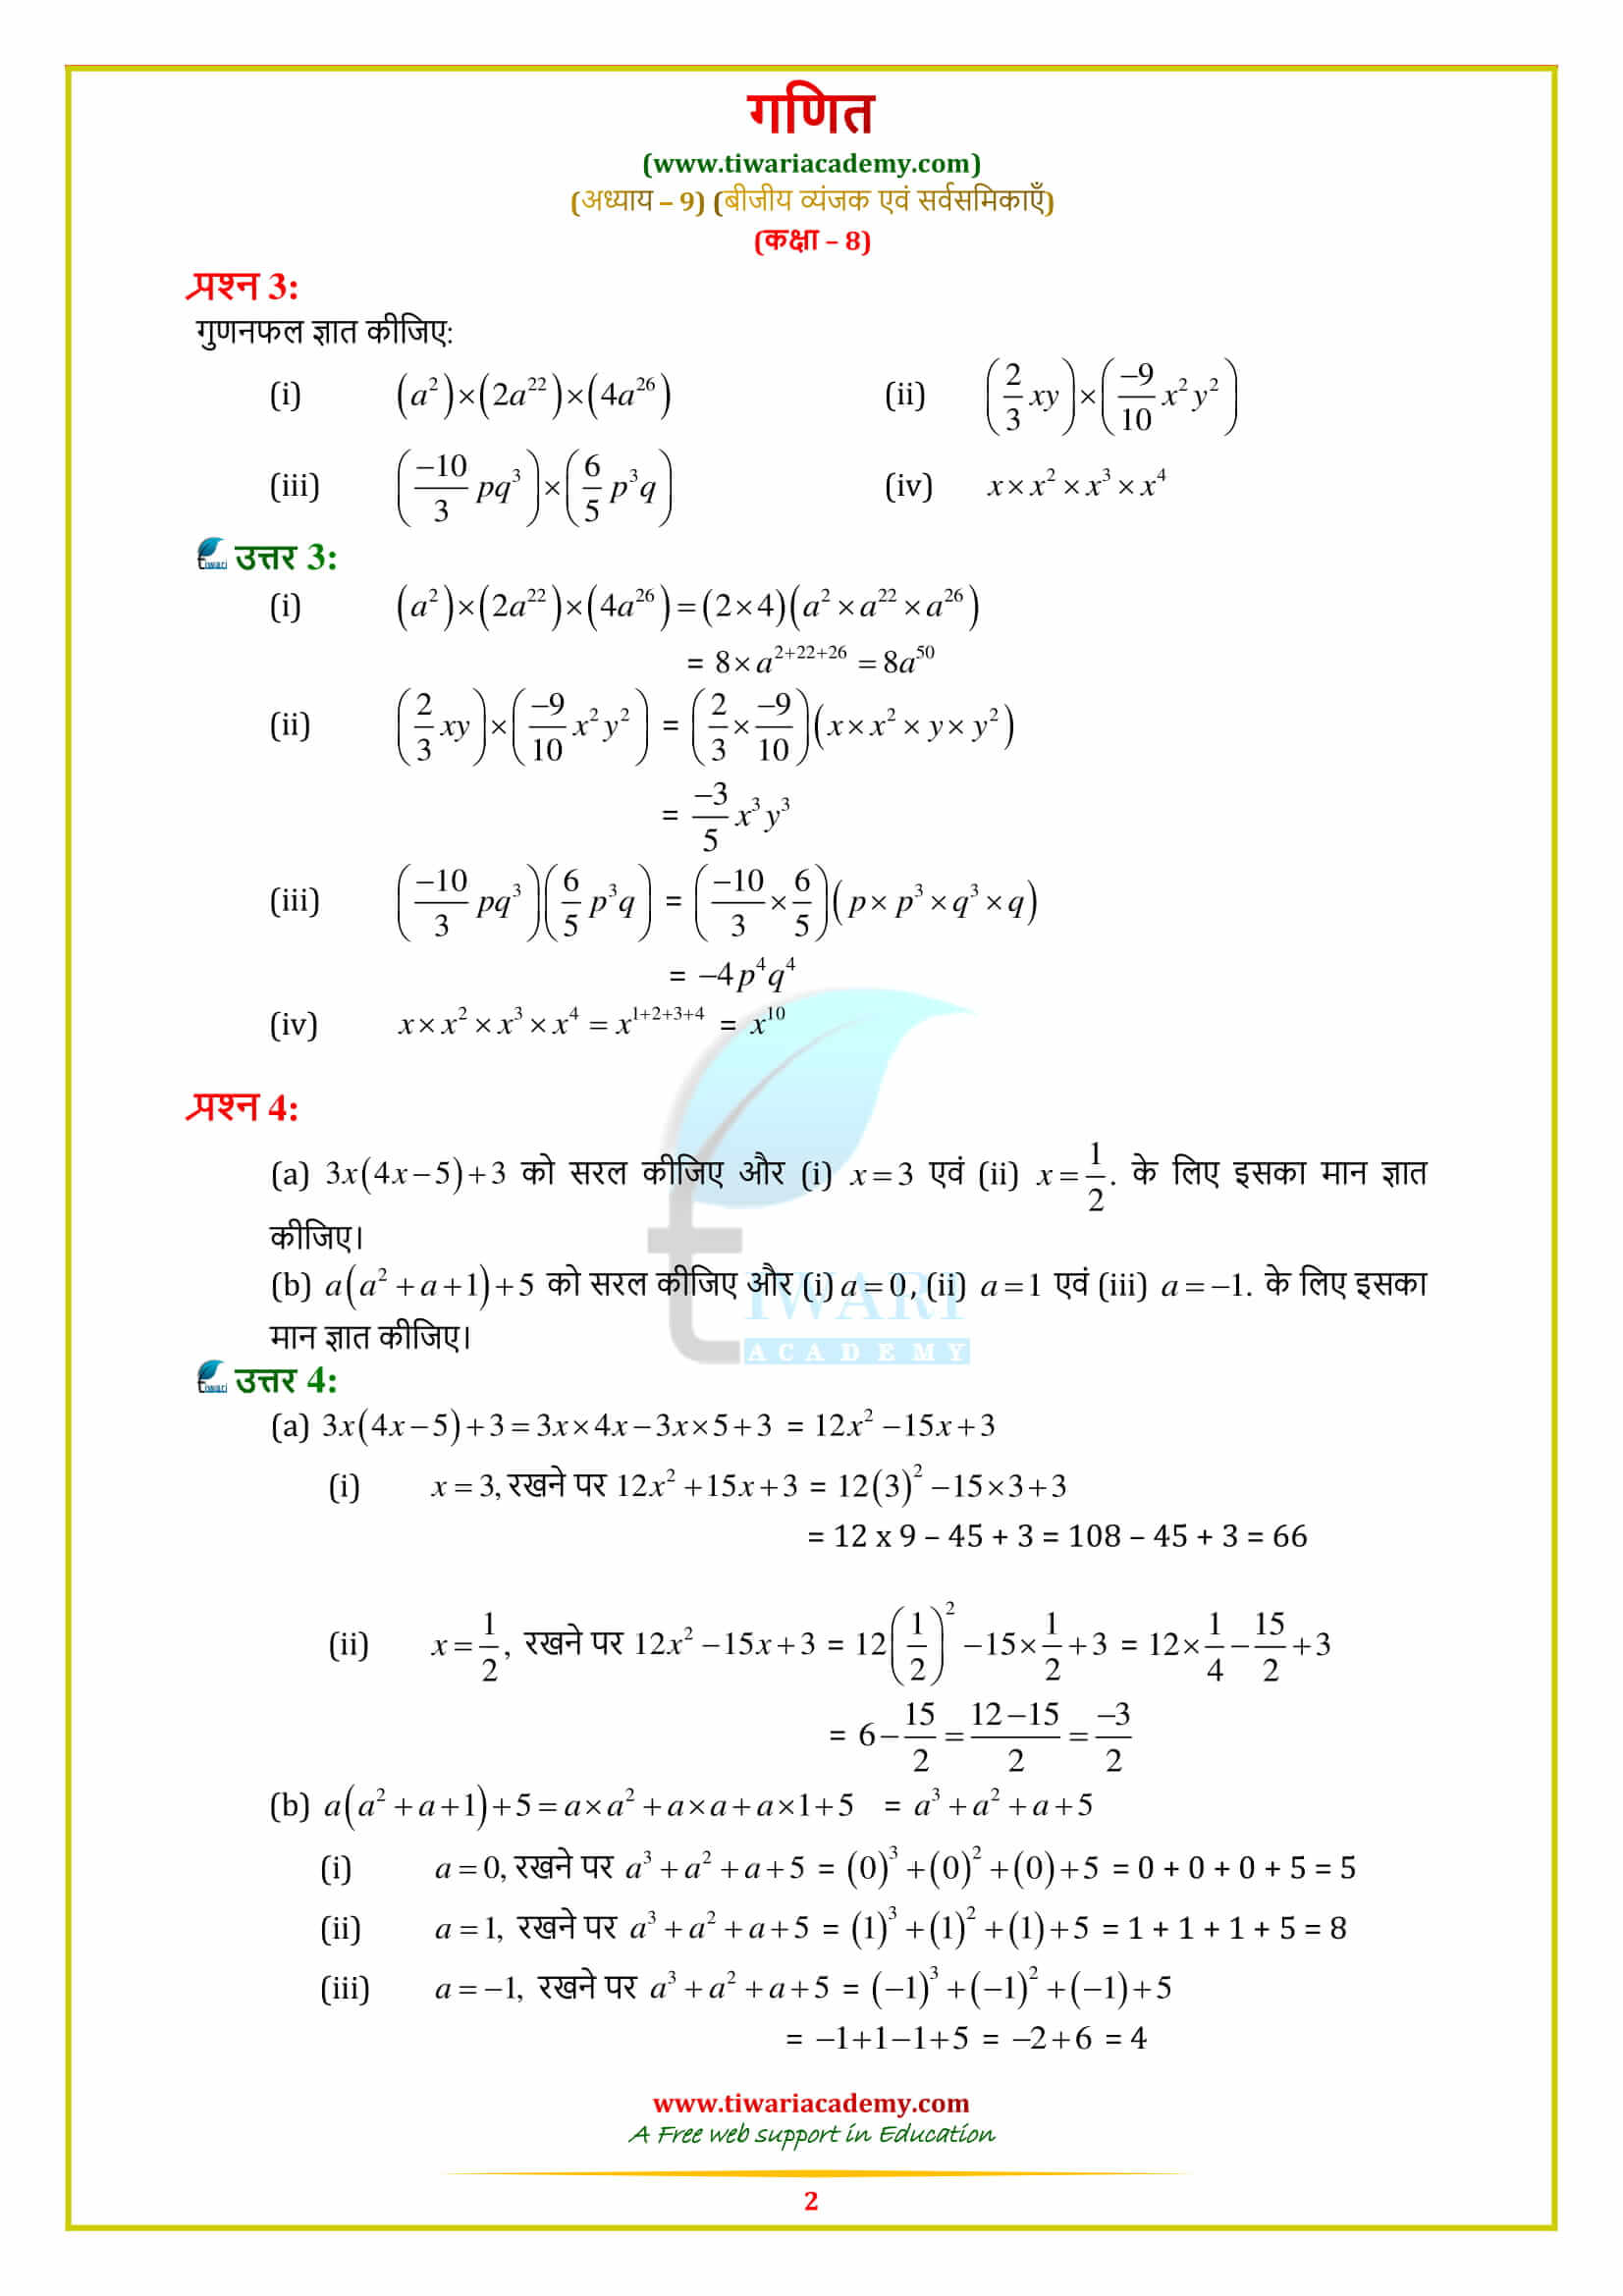 8 Maths Exercise 9.3 Solutions in hindi medium